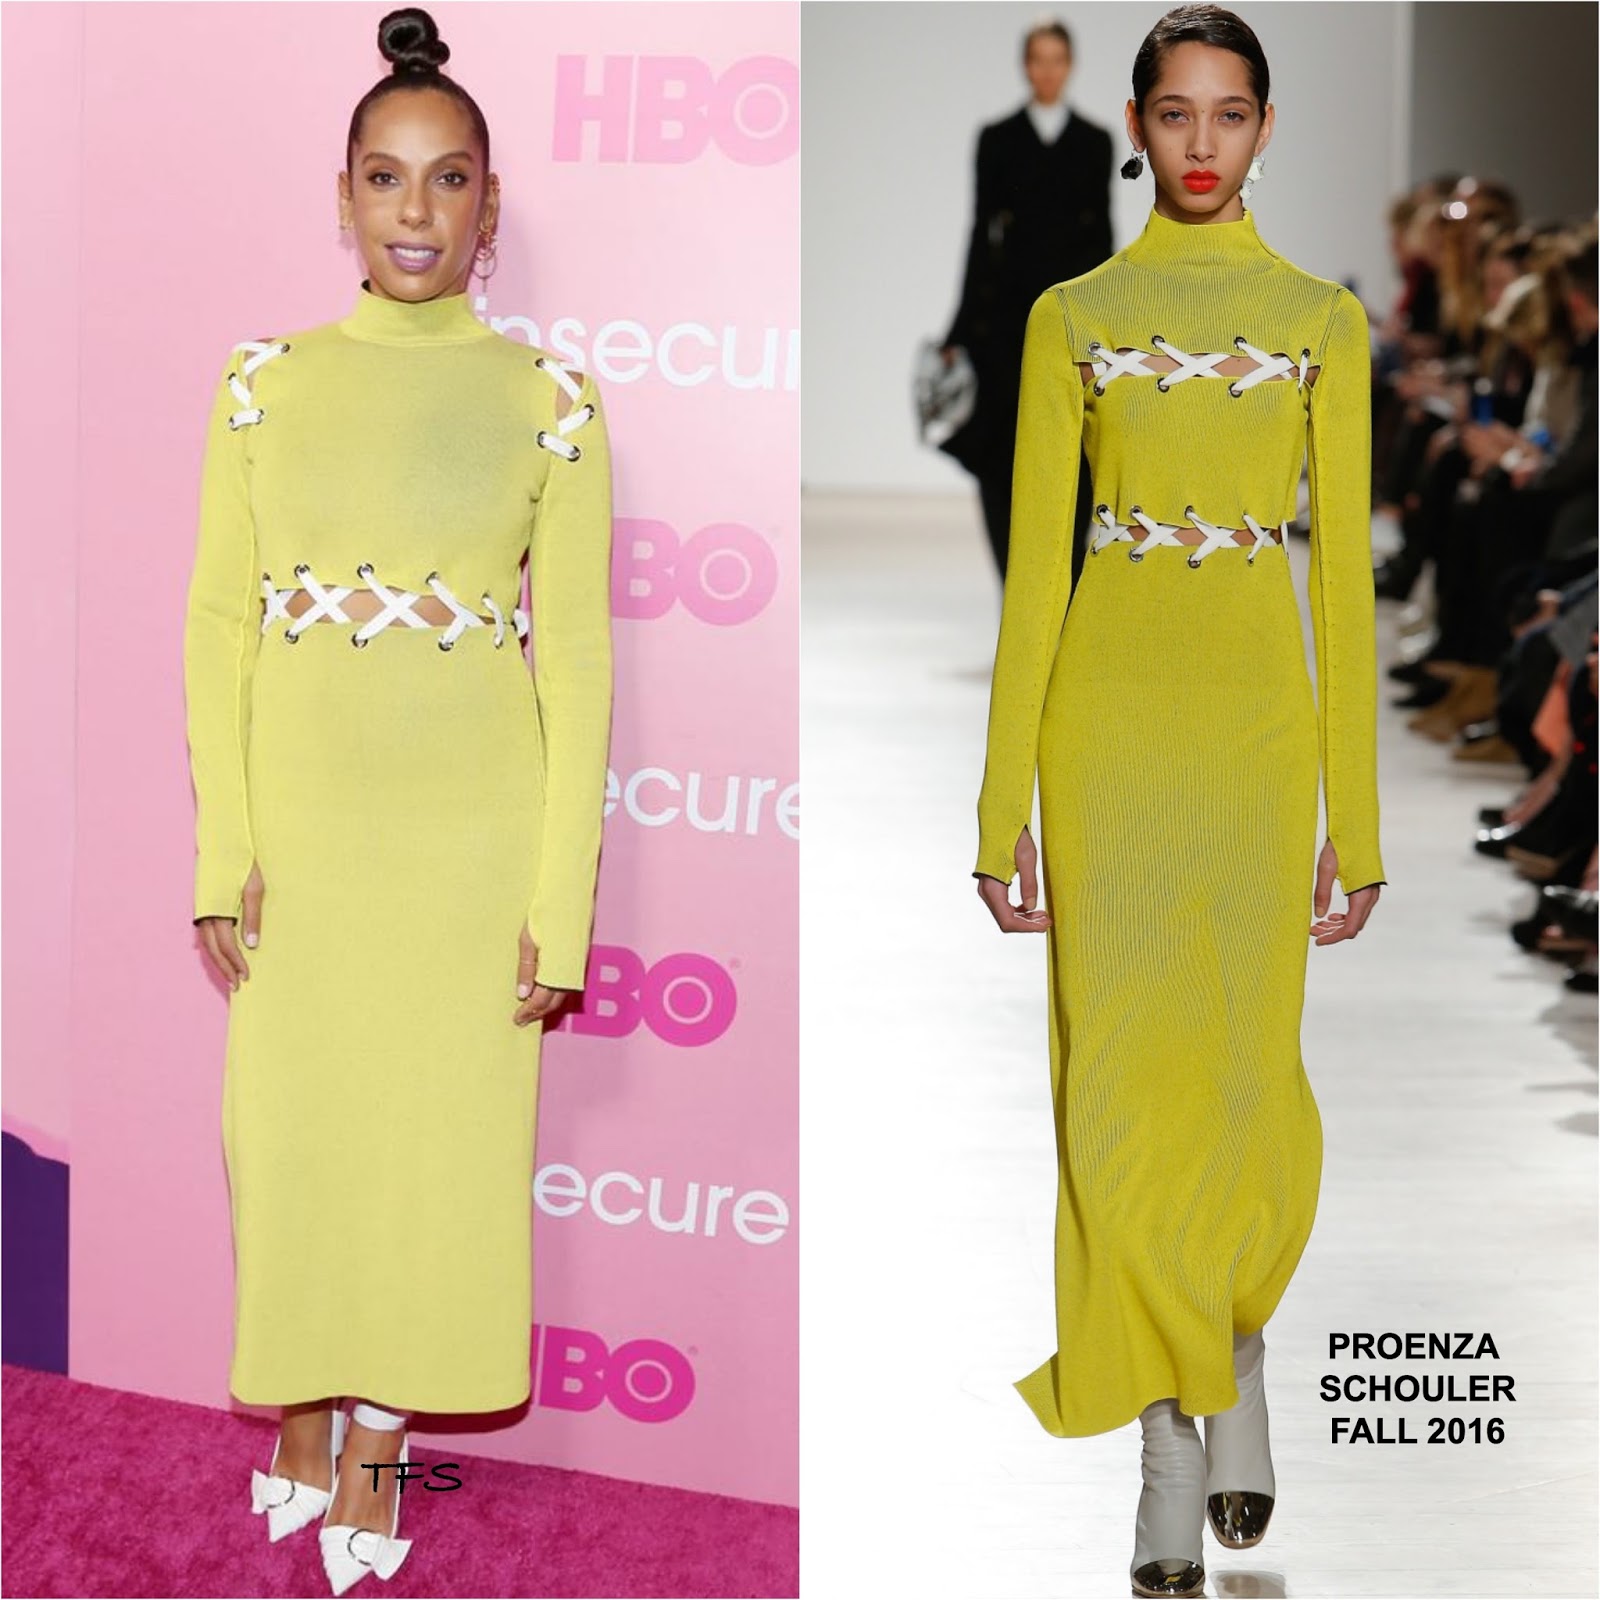 Melina Matsoukas in Proenza Schouler at the 'Insecure' LA Premiere